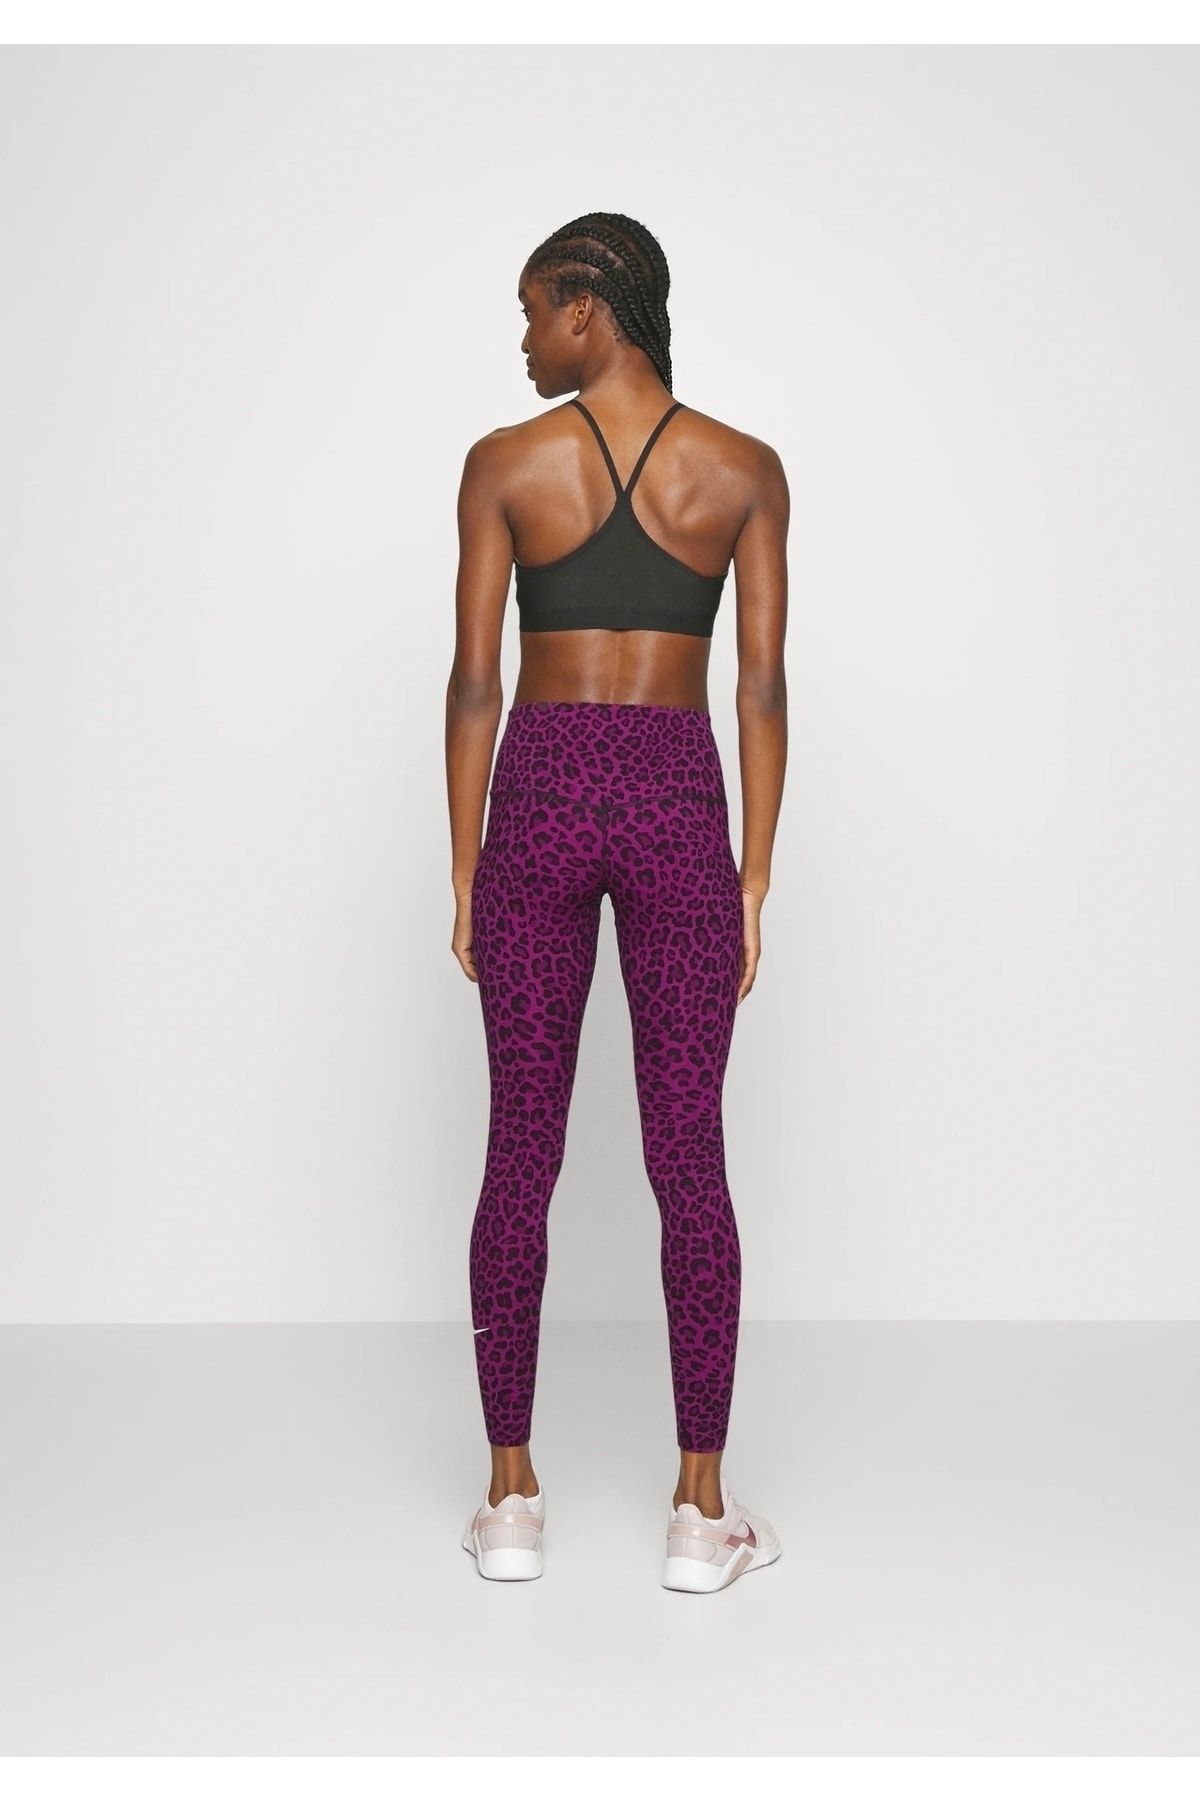 NA-H29 (W nike one luxe iconclash tights black/purple chalk/clear